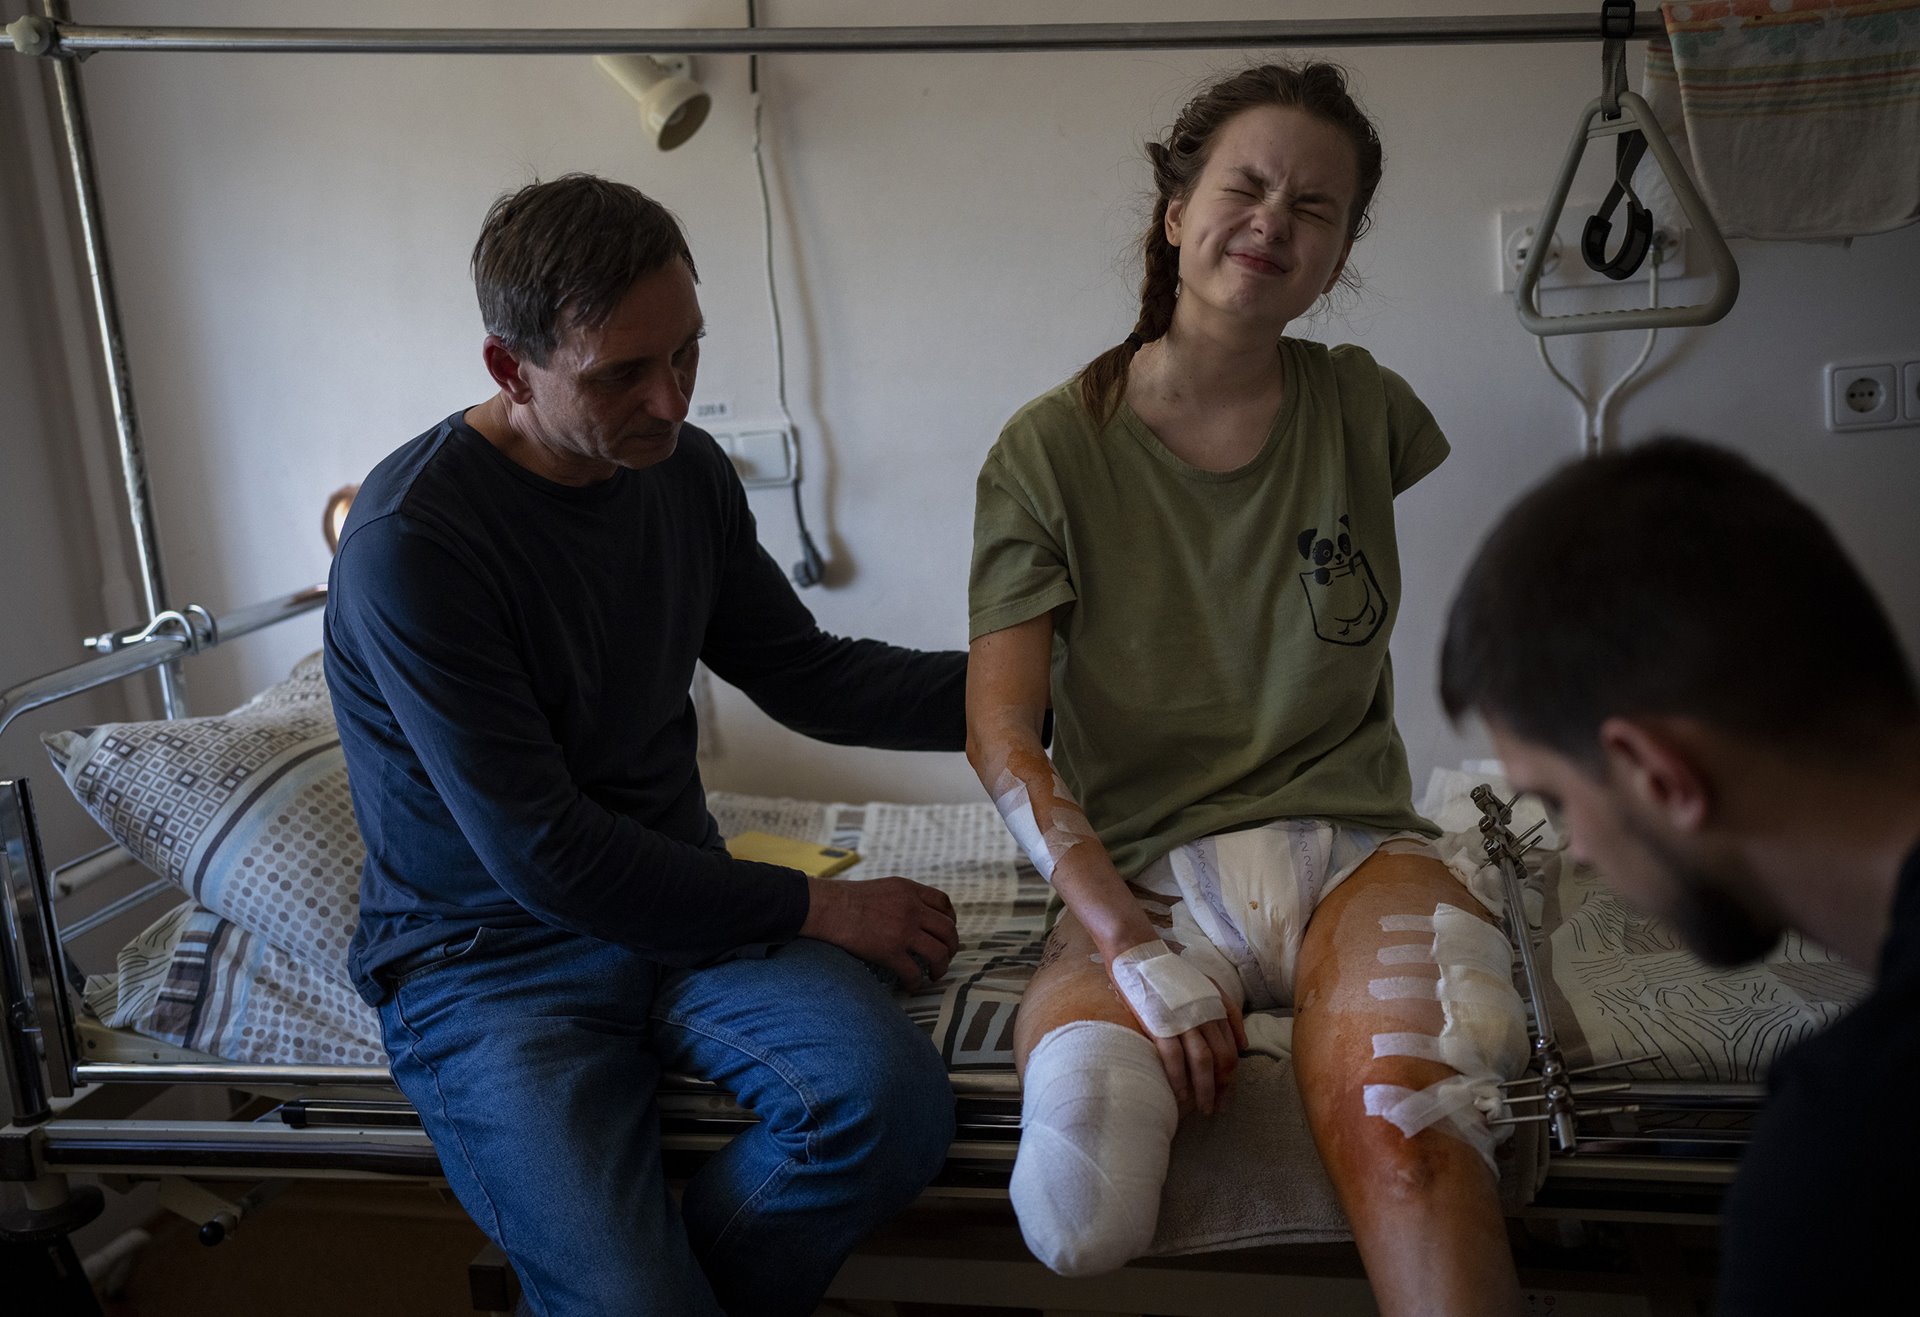 Nastia Kuzik (21) winces while undergoing a rehabilitation session at a public hospital in Kyiv, Ukraine. Nastia was caught in bombardment on the way back home from a visit to her brother, in Chernihiv, on 17 March. The city of Chernihiv, in northern Ukraine, was under siege from 24 February to early April.&nbsp;